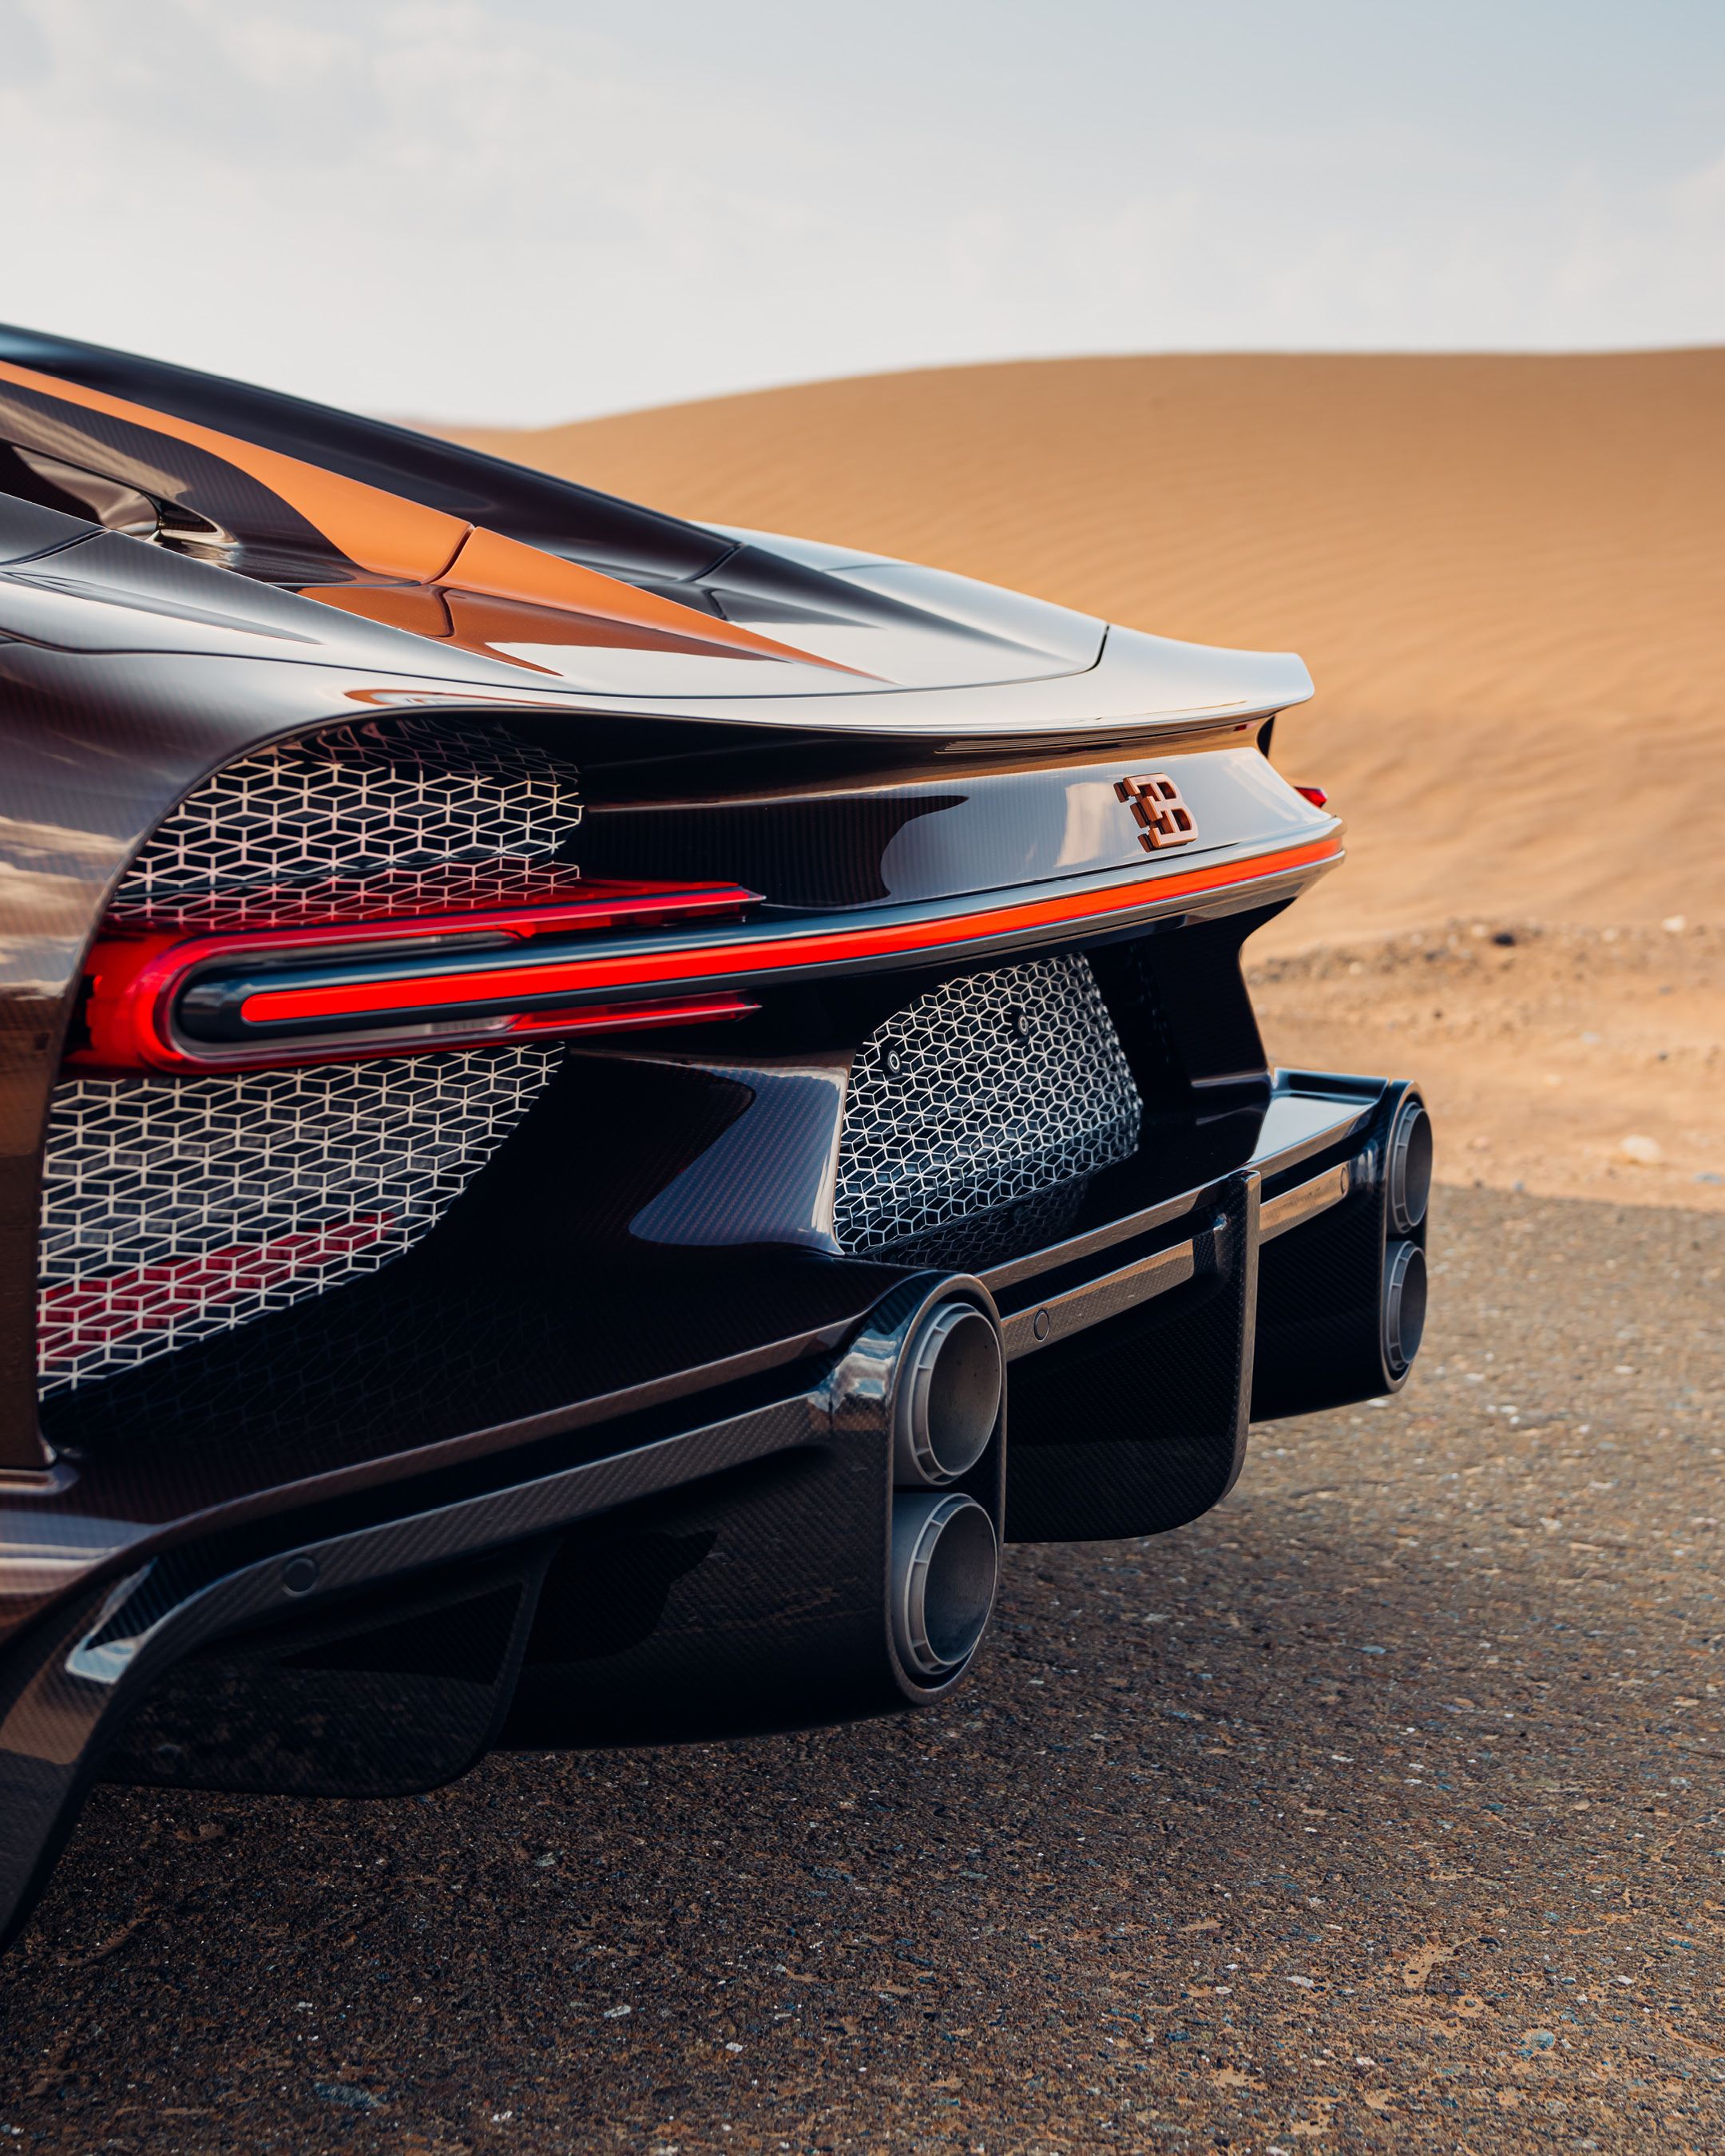 Bugatti Hintergrundbild 2160x2700. Bugatti CHIRON Super Sport arrives in the Middle Eastern desert. It is the first time this BUGATTI creation is being shown to the world. Adding depth to the Brown